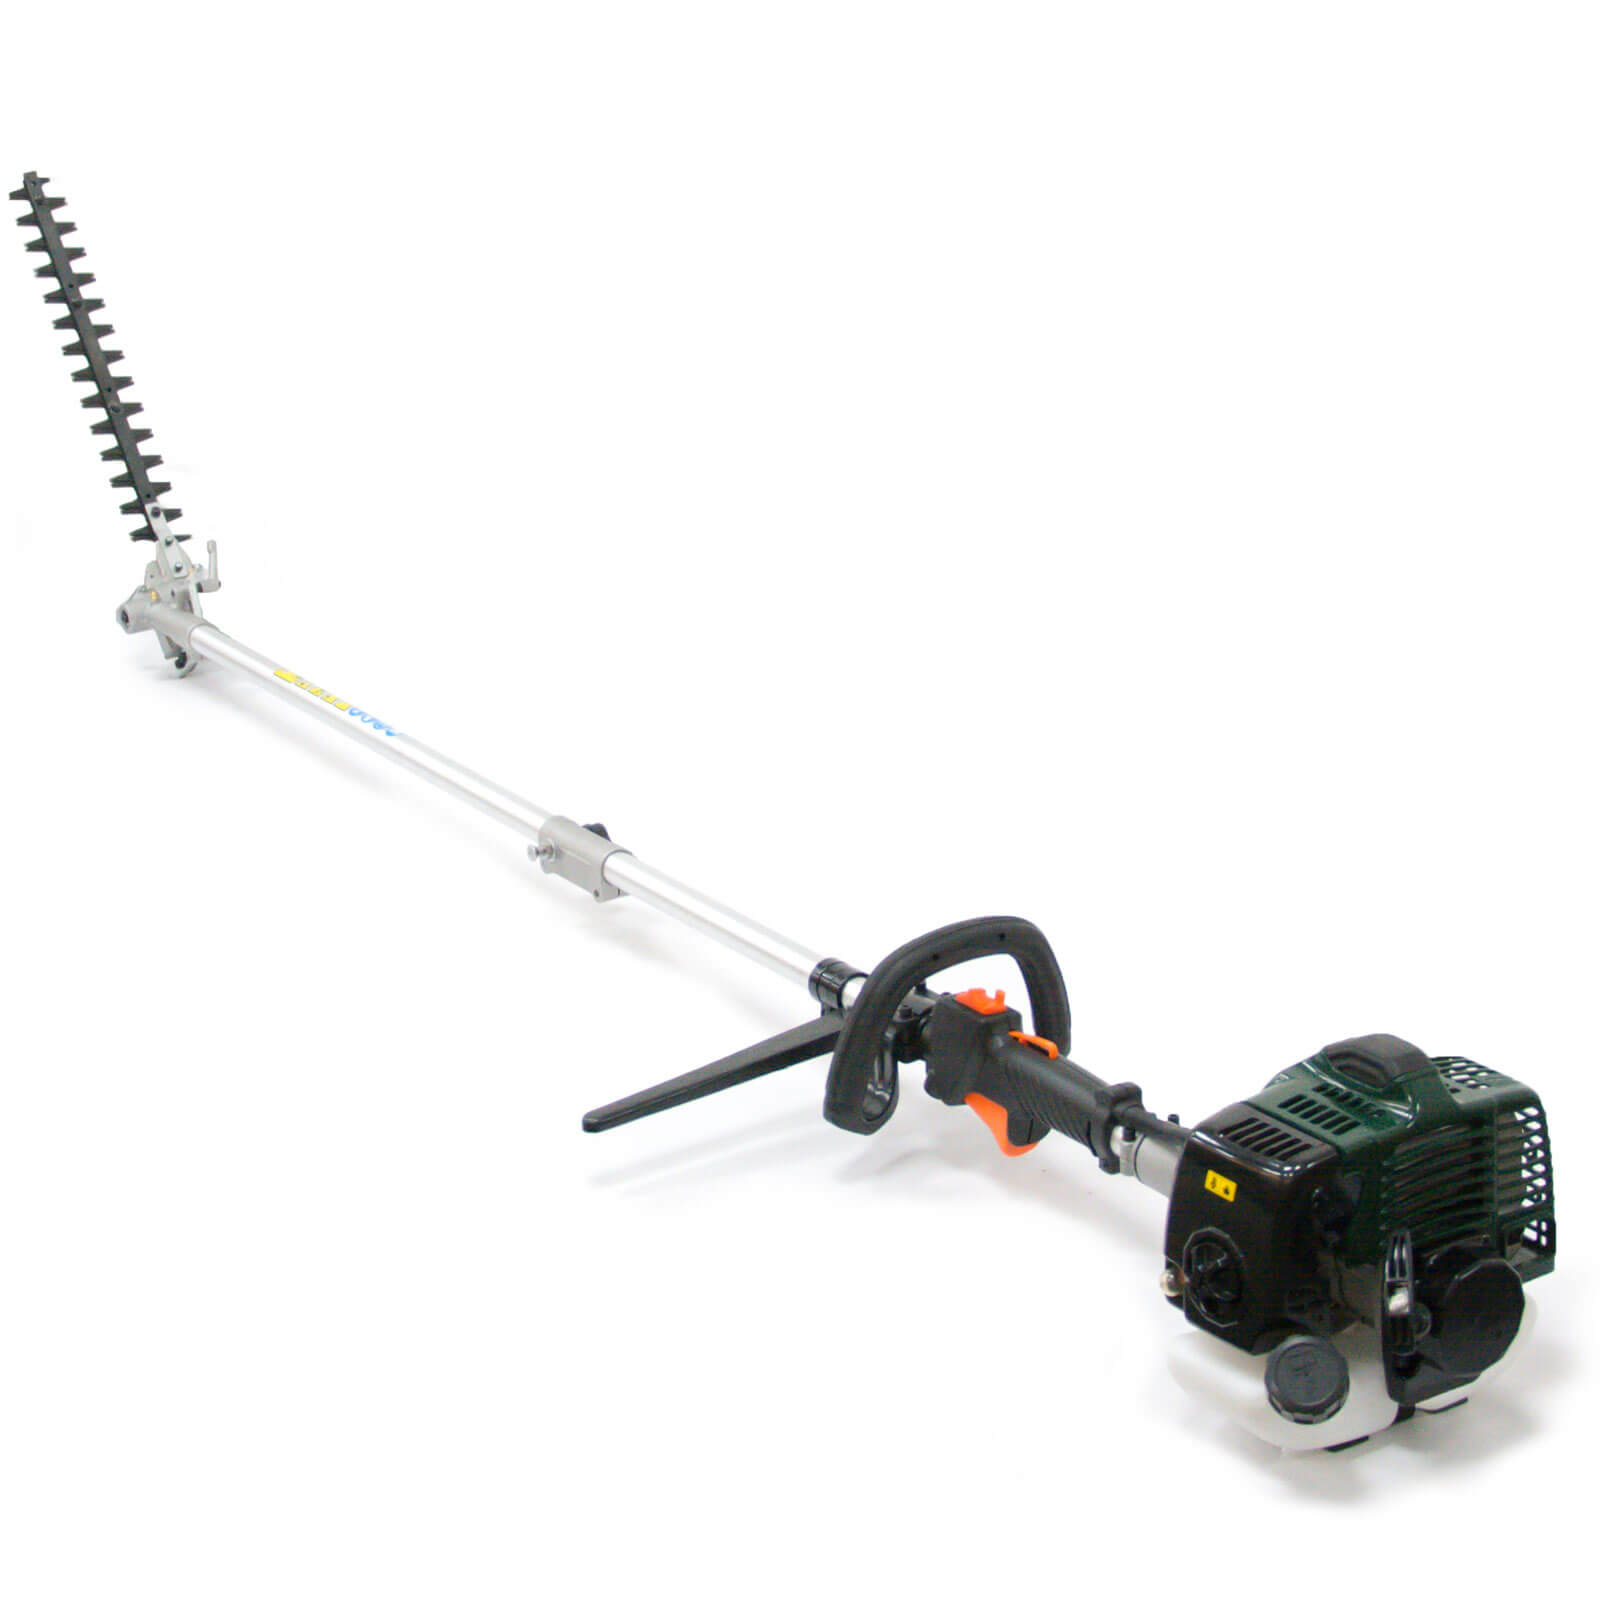 Image of Webb WEMC26 4 in 1 Petrol Multi Cutter with Attachments FREE Garden Gloves & Safety Glasses Worth £6.90